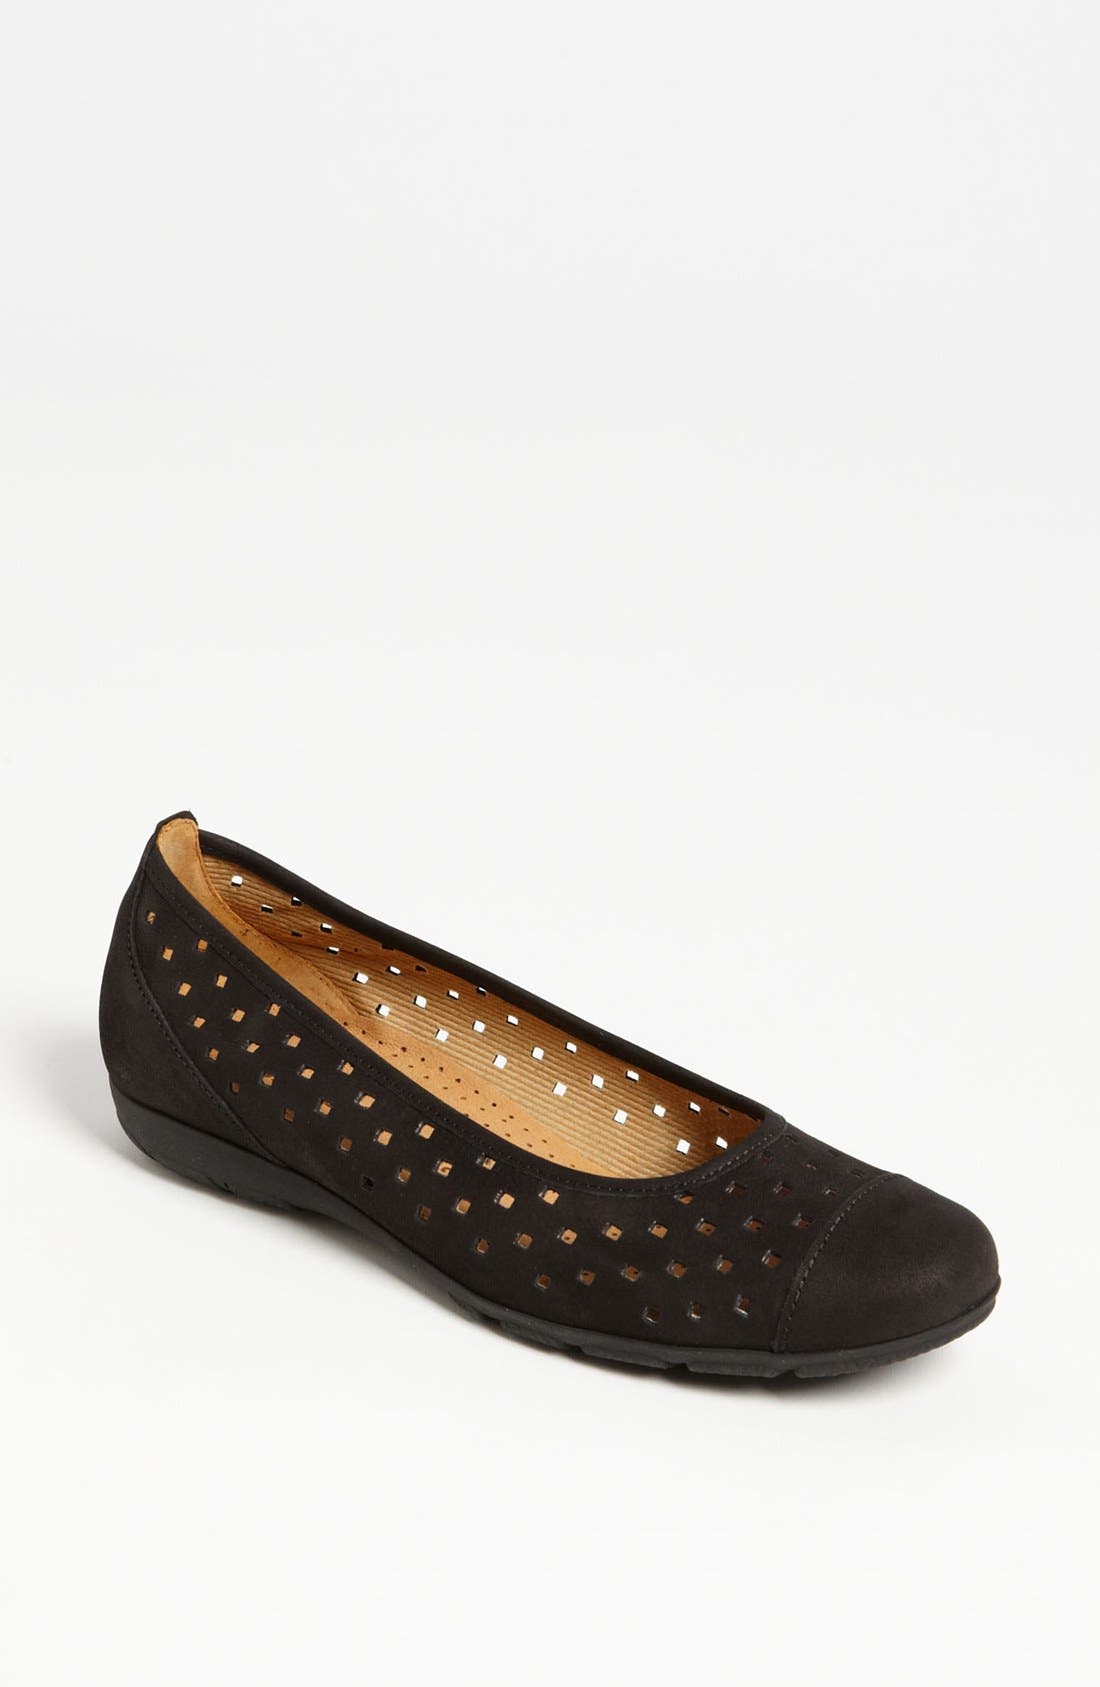 gabor shoes nordstrom